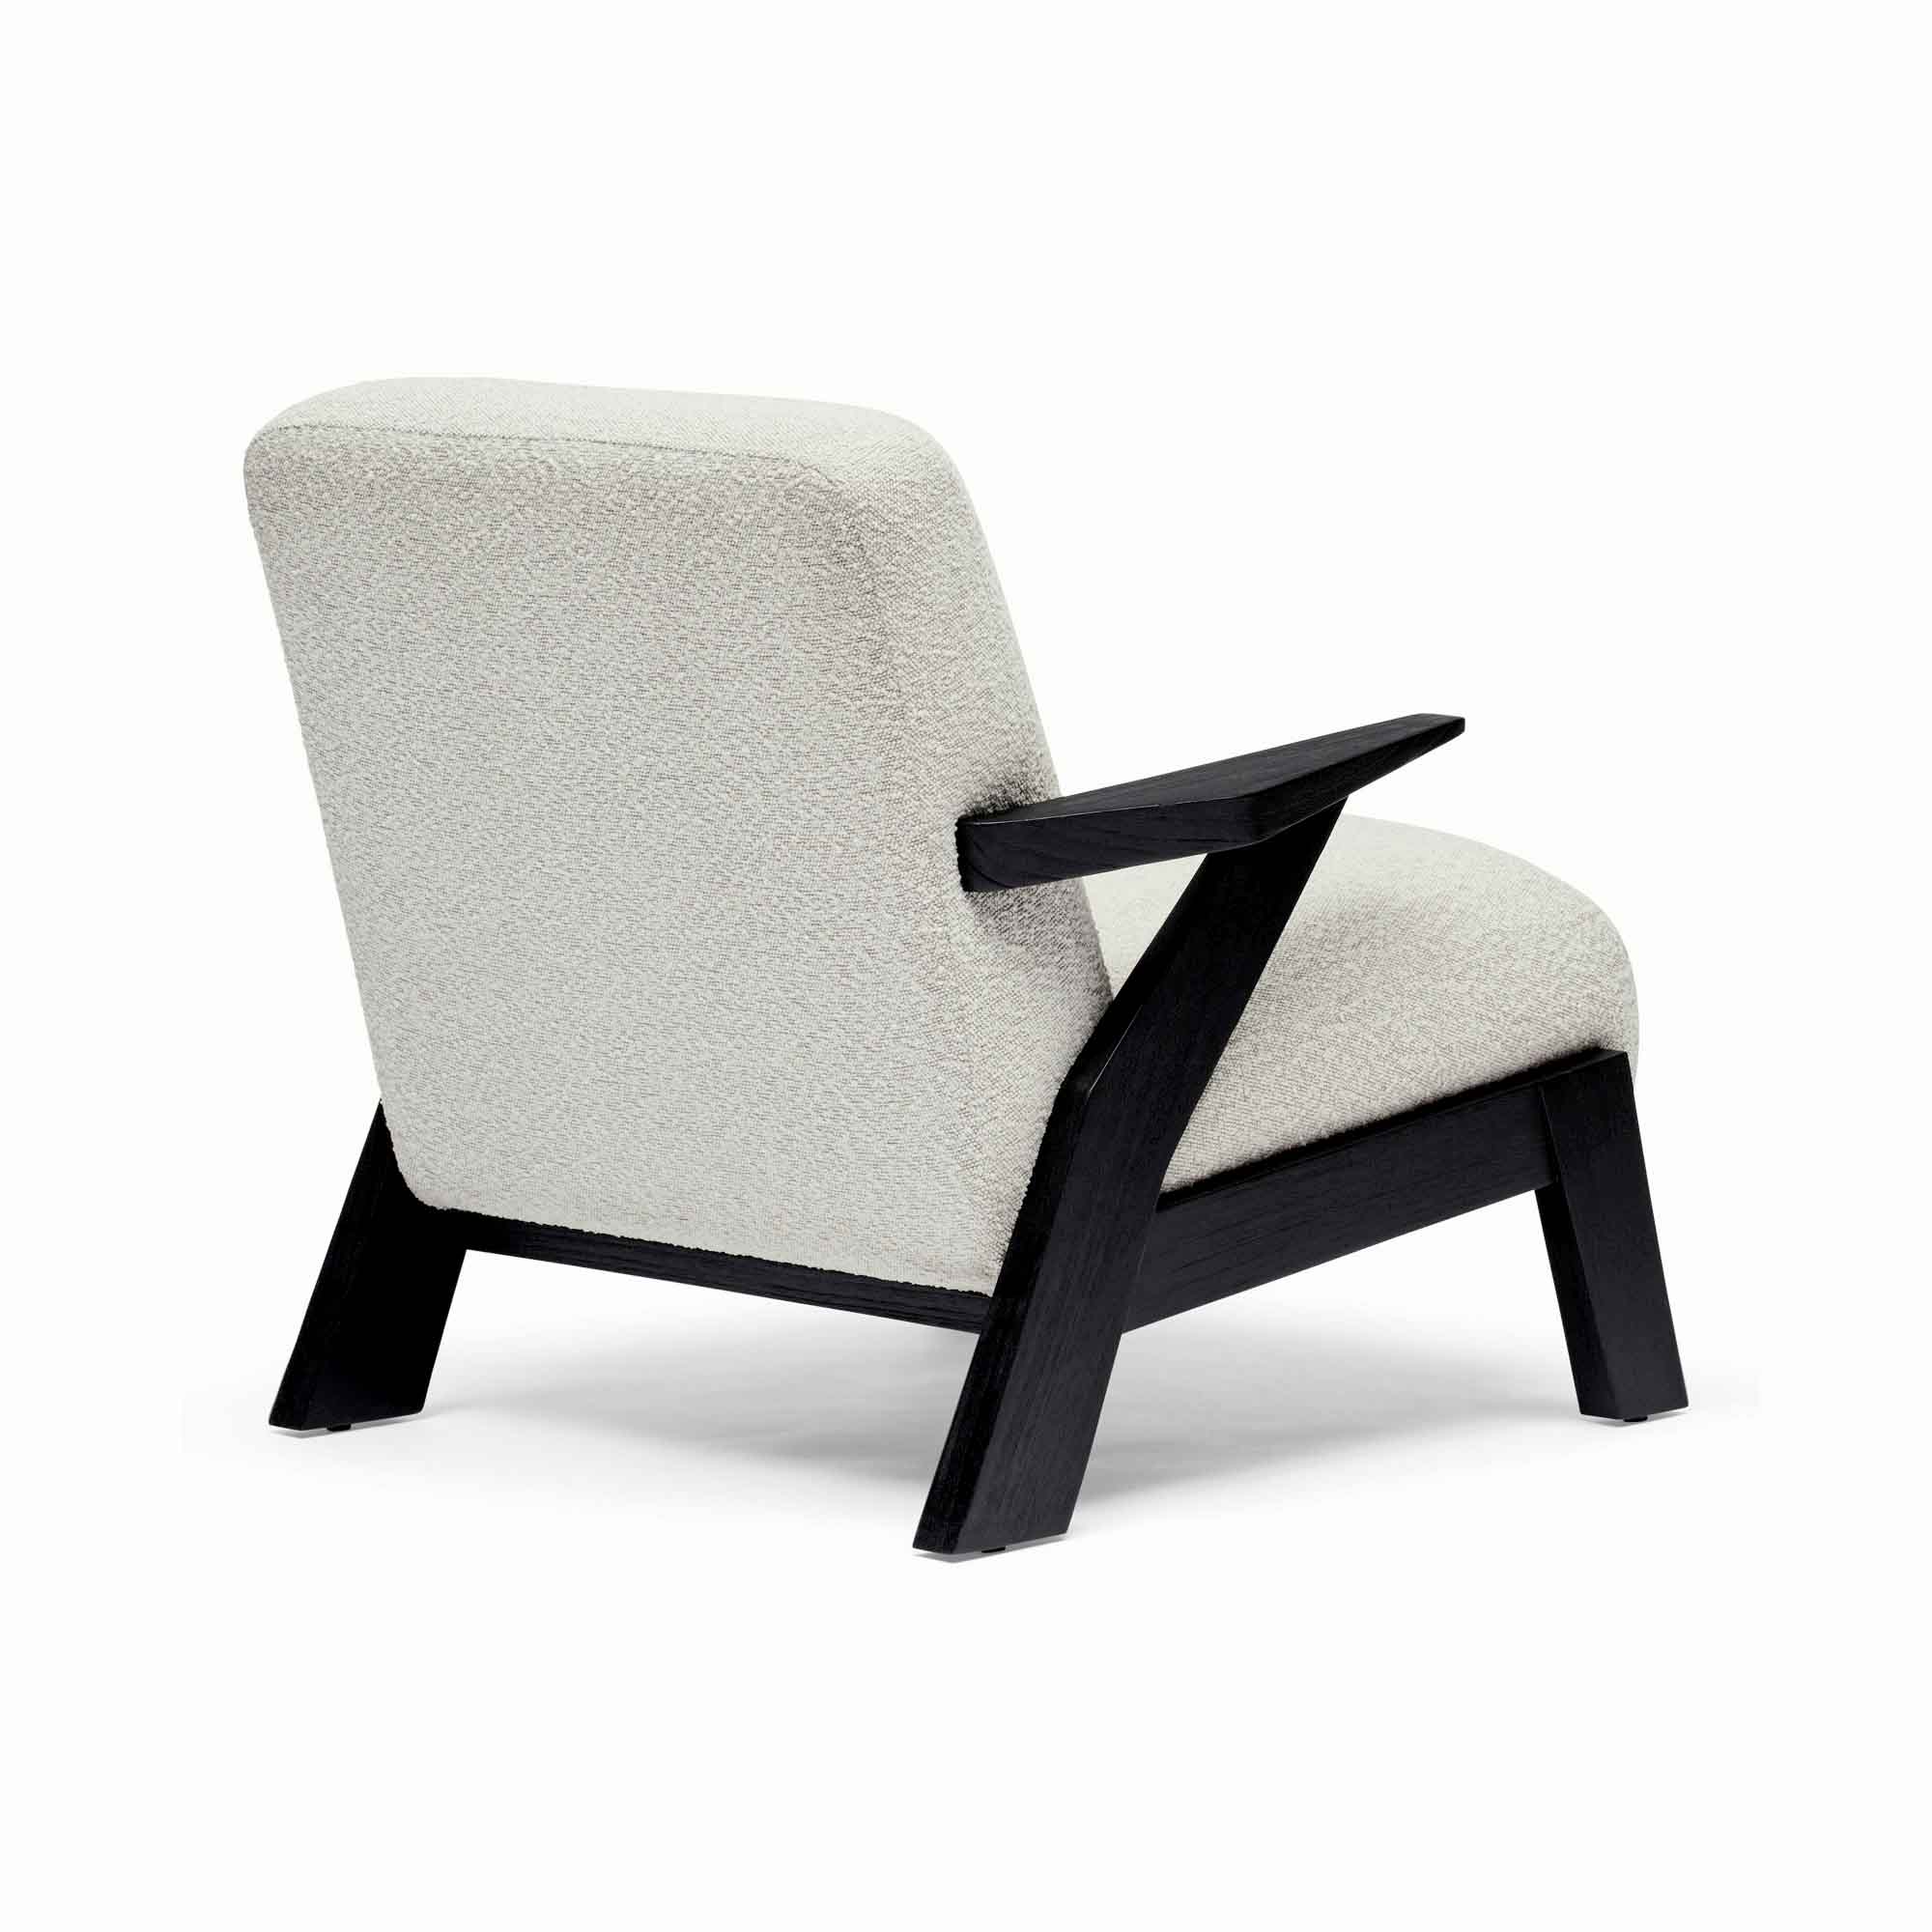 Patton Occasional Chair